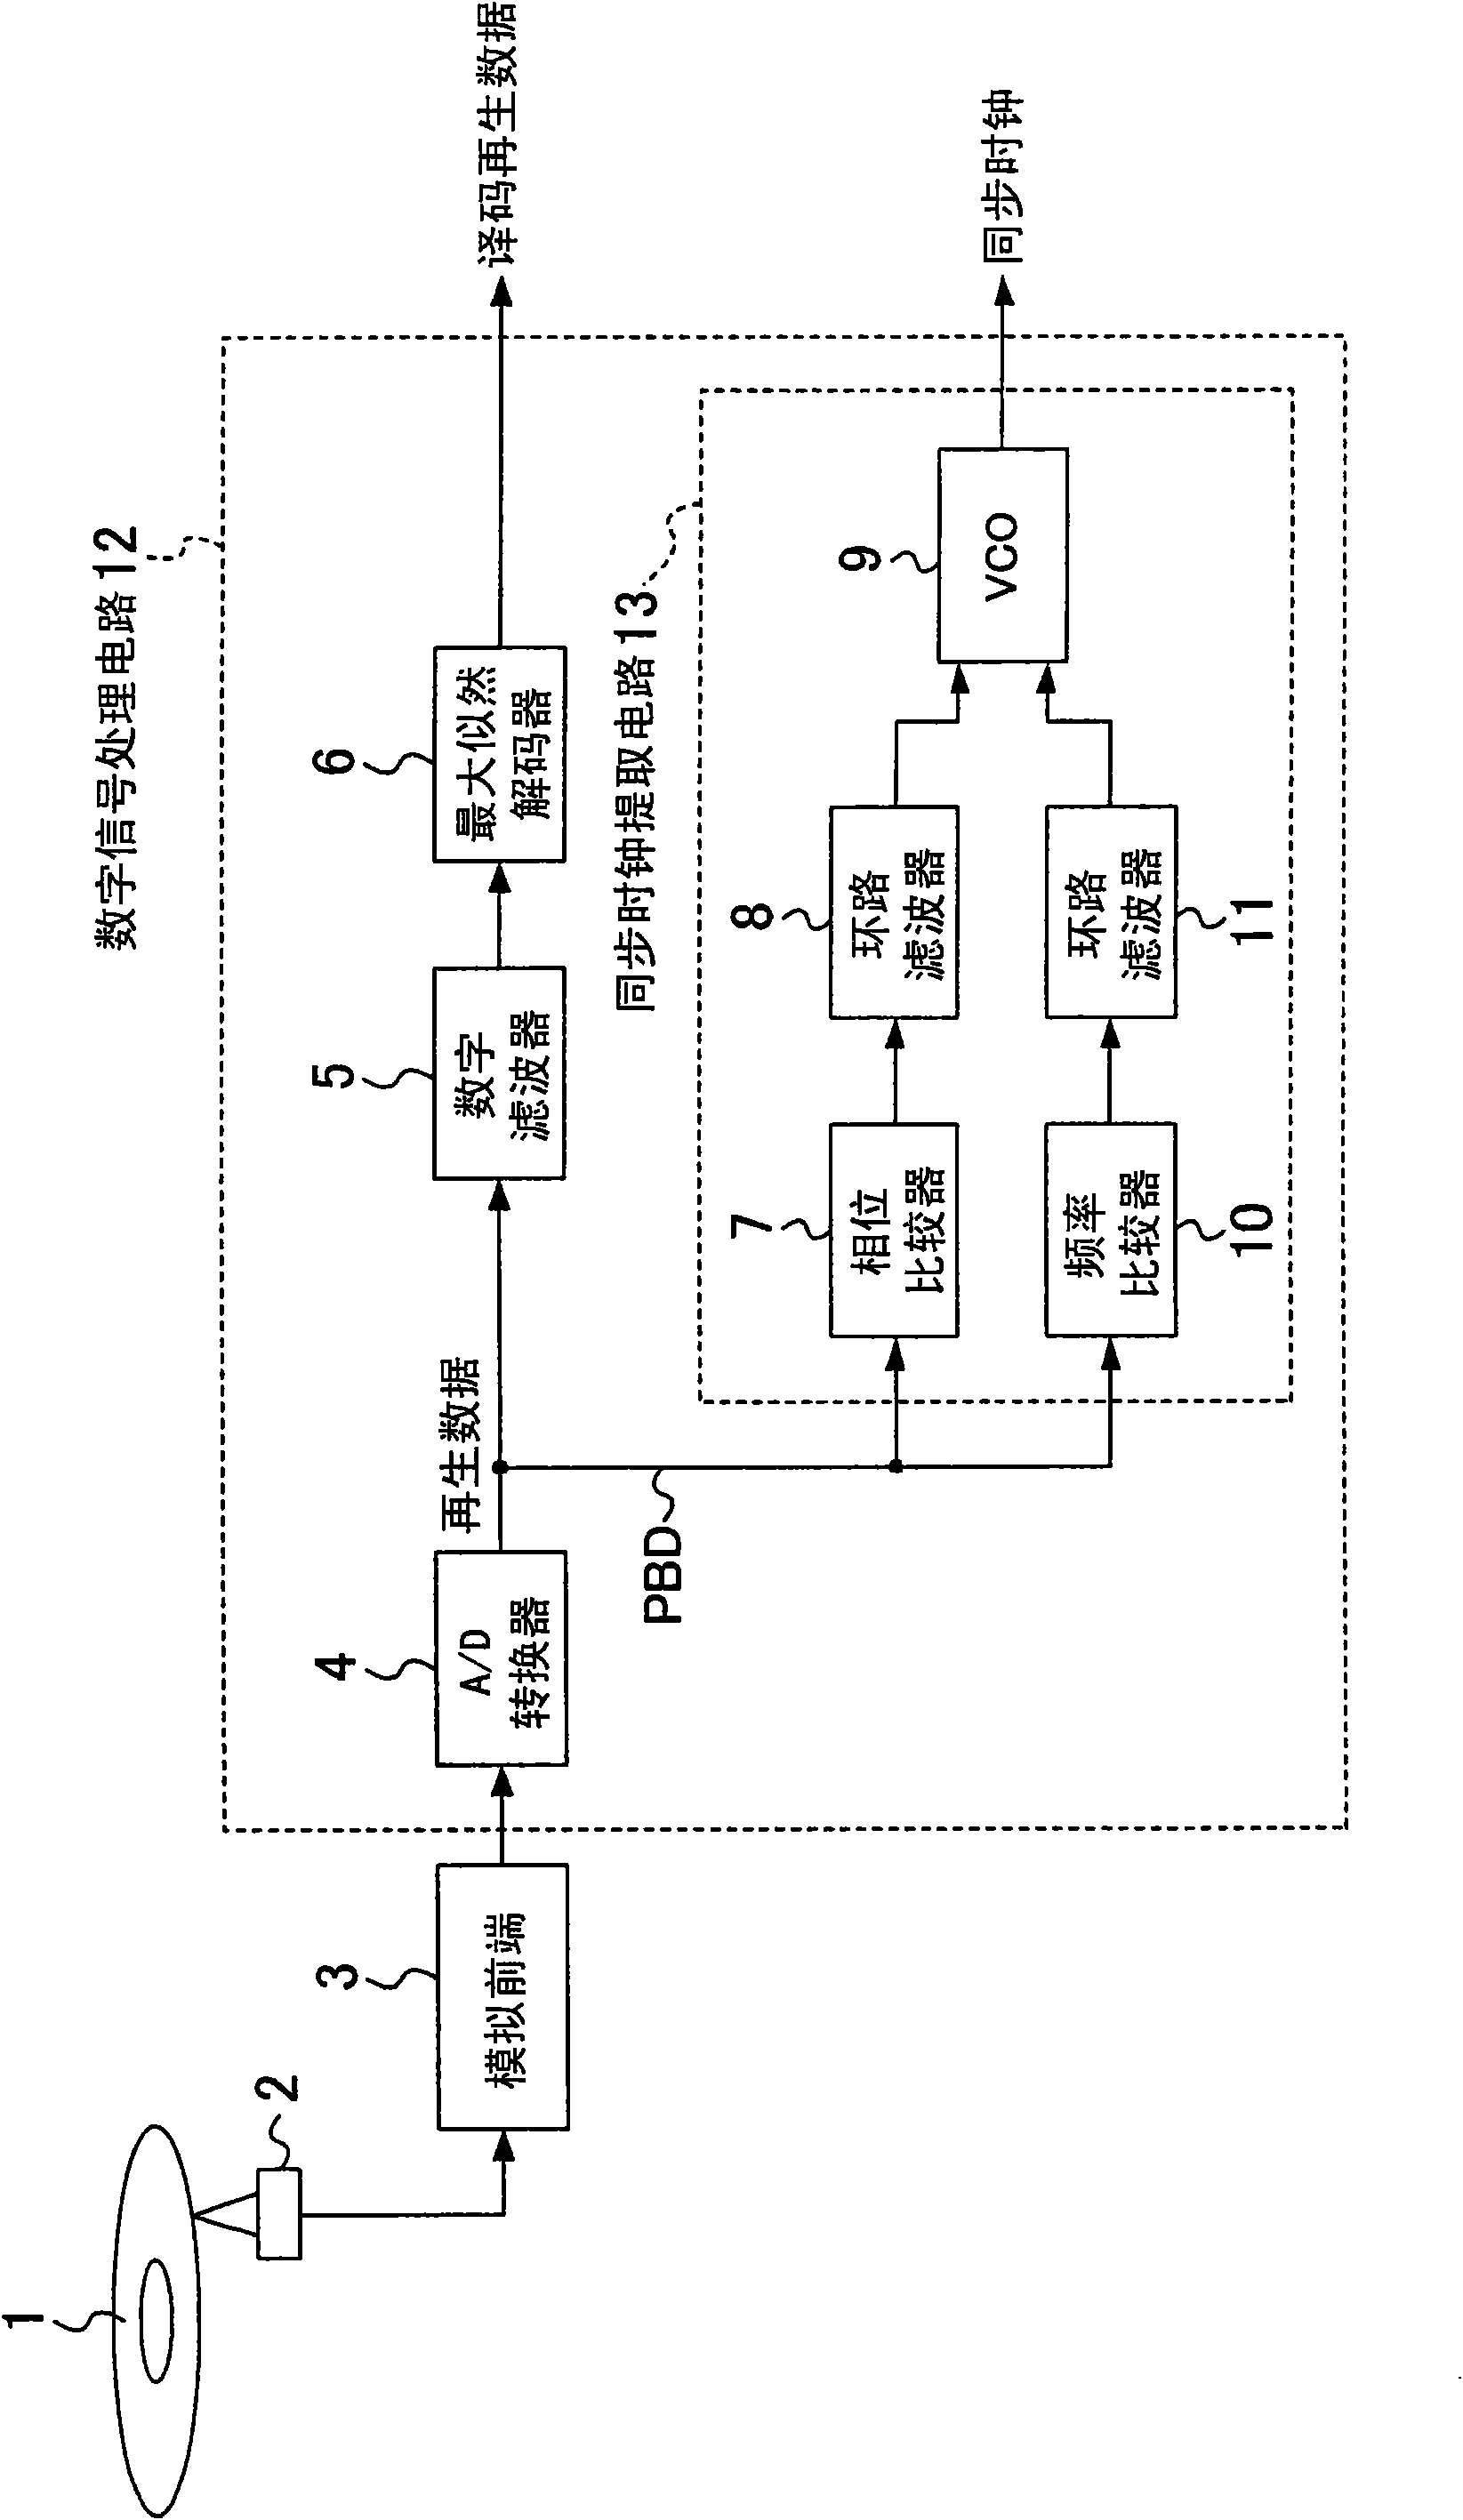 Phase comparator, pll circuit, information regeneration processing apparatus, optical disc regenerating apparatus, and magnetic disc regenerating apparatus